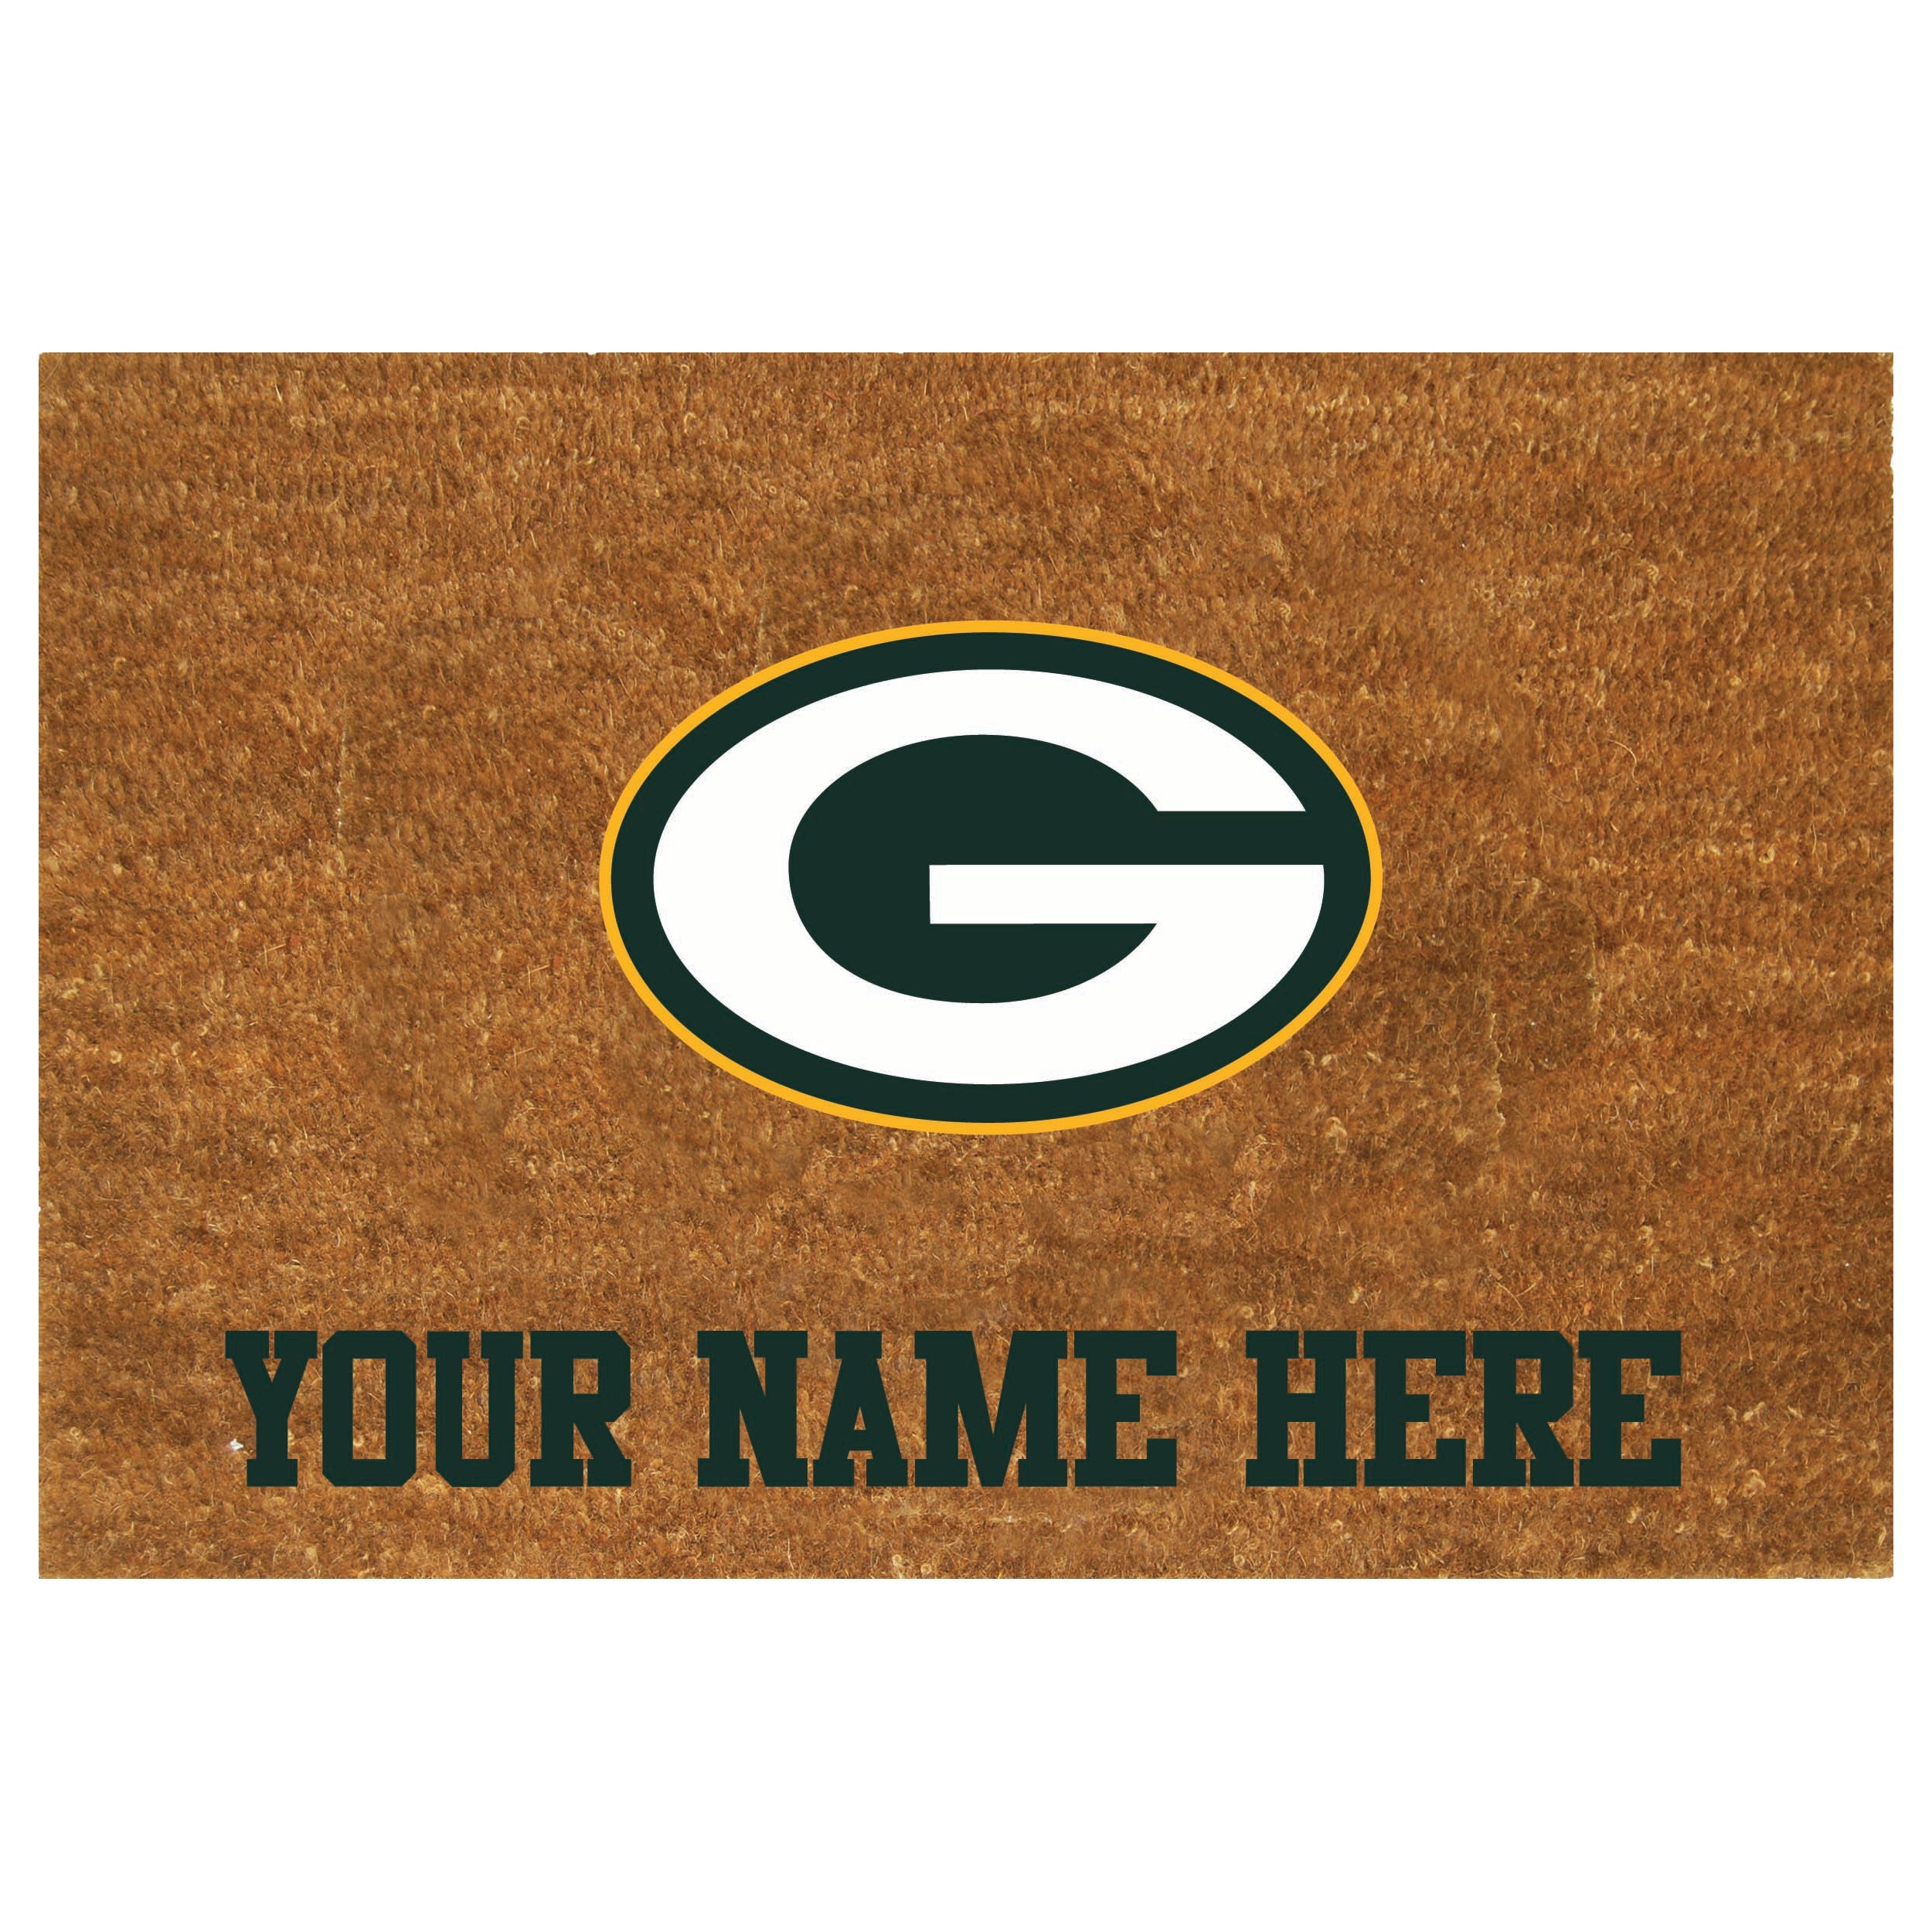 Personalized Doormat | Green Bay Packers